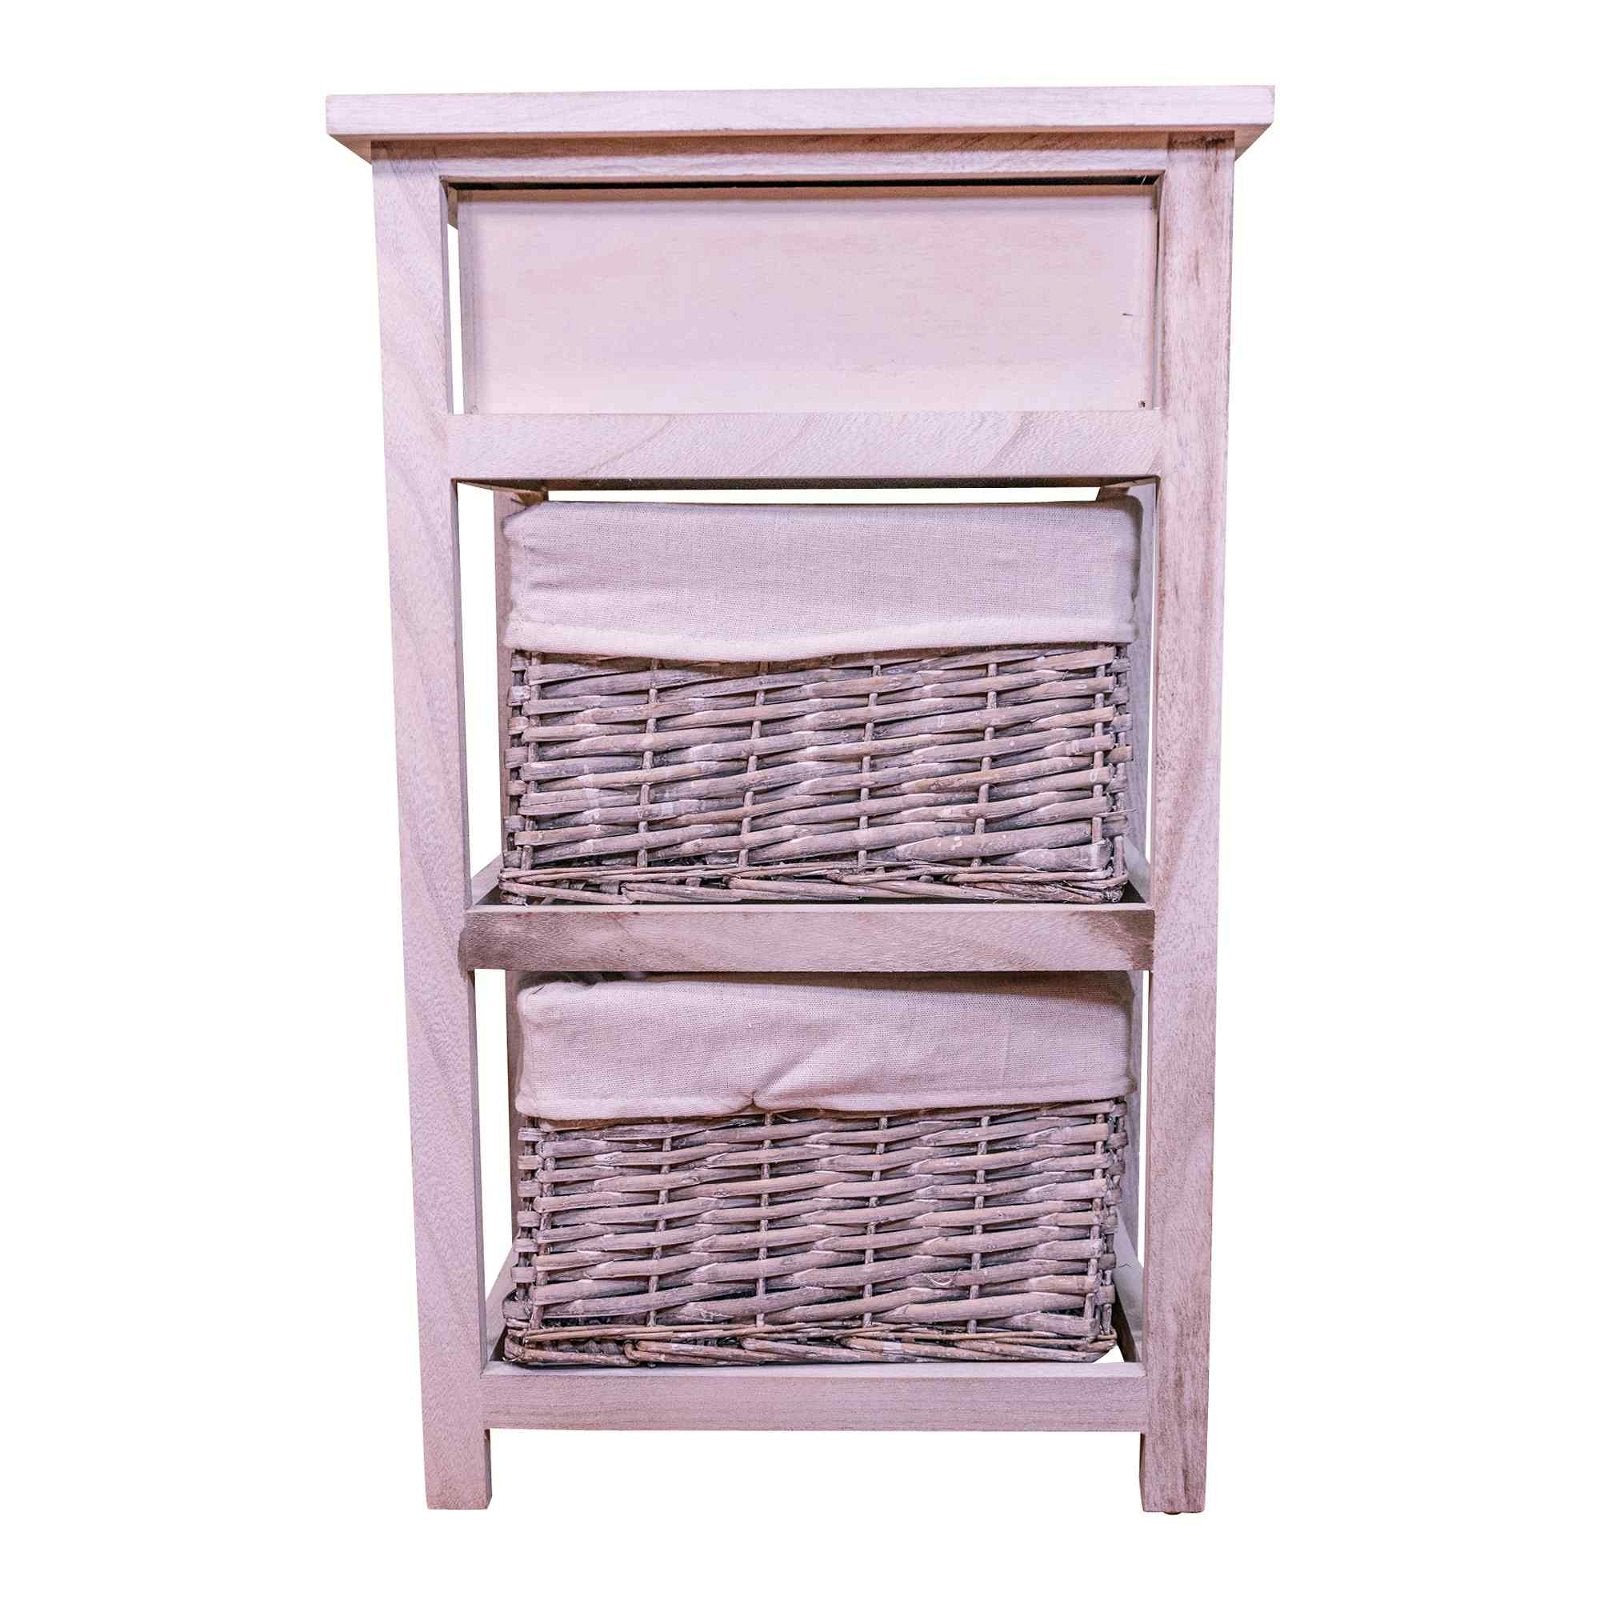 Murray Light Grey Wood Grain Effect Cabinet With Drawers